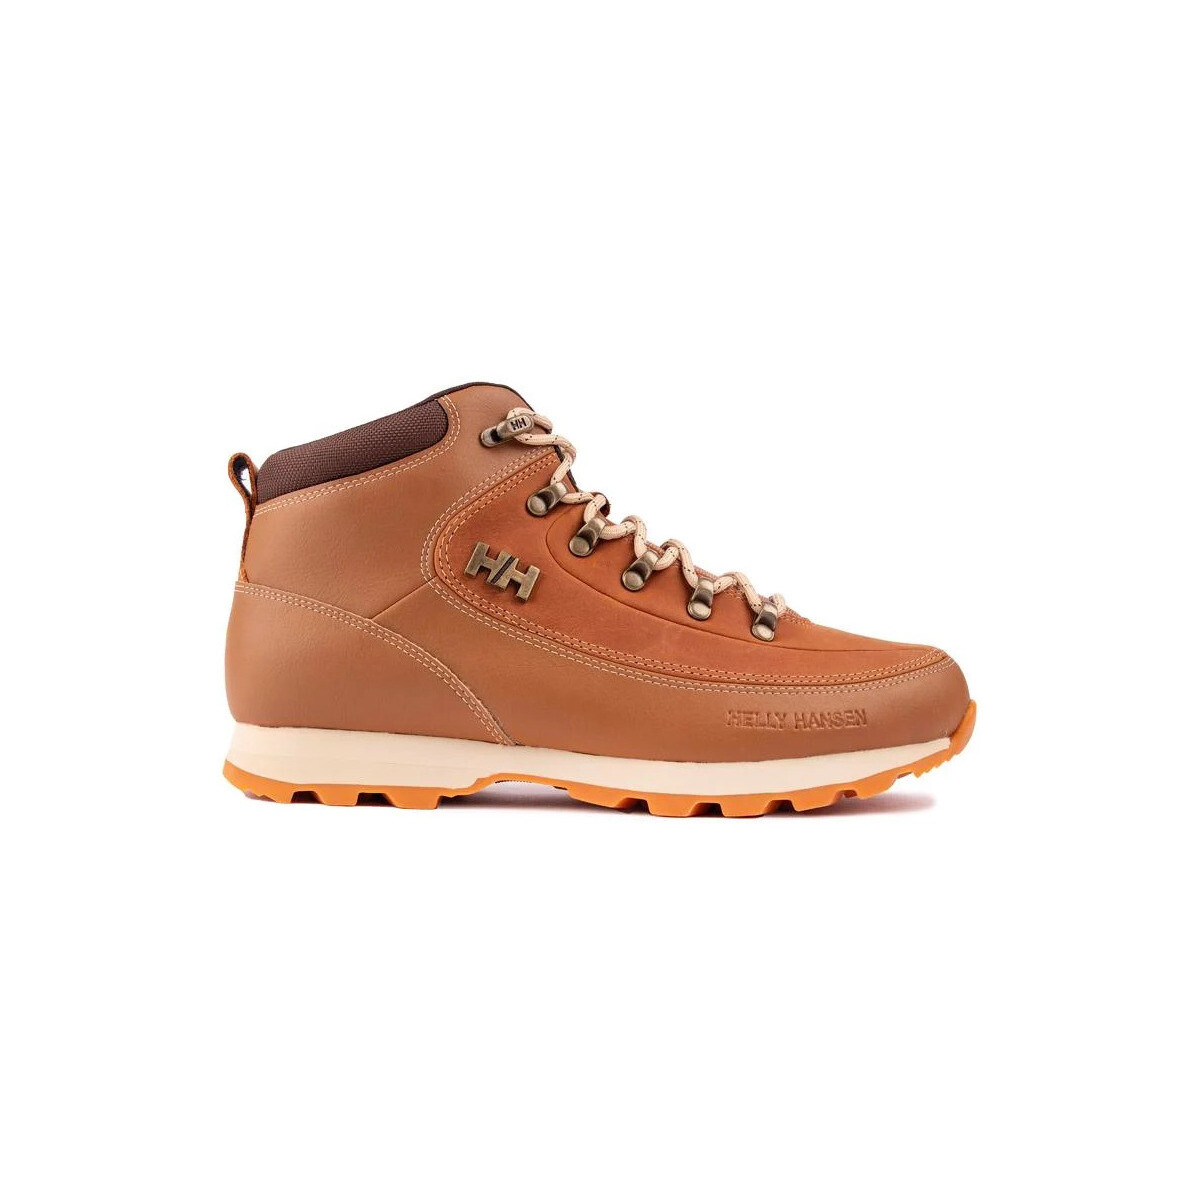 Helly Hansen Marron Forester Durable YkyS7JZ8